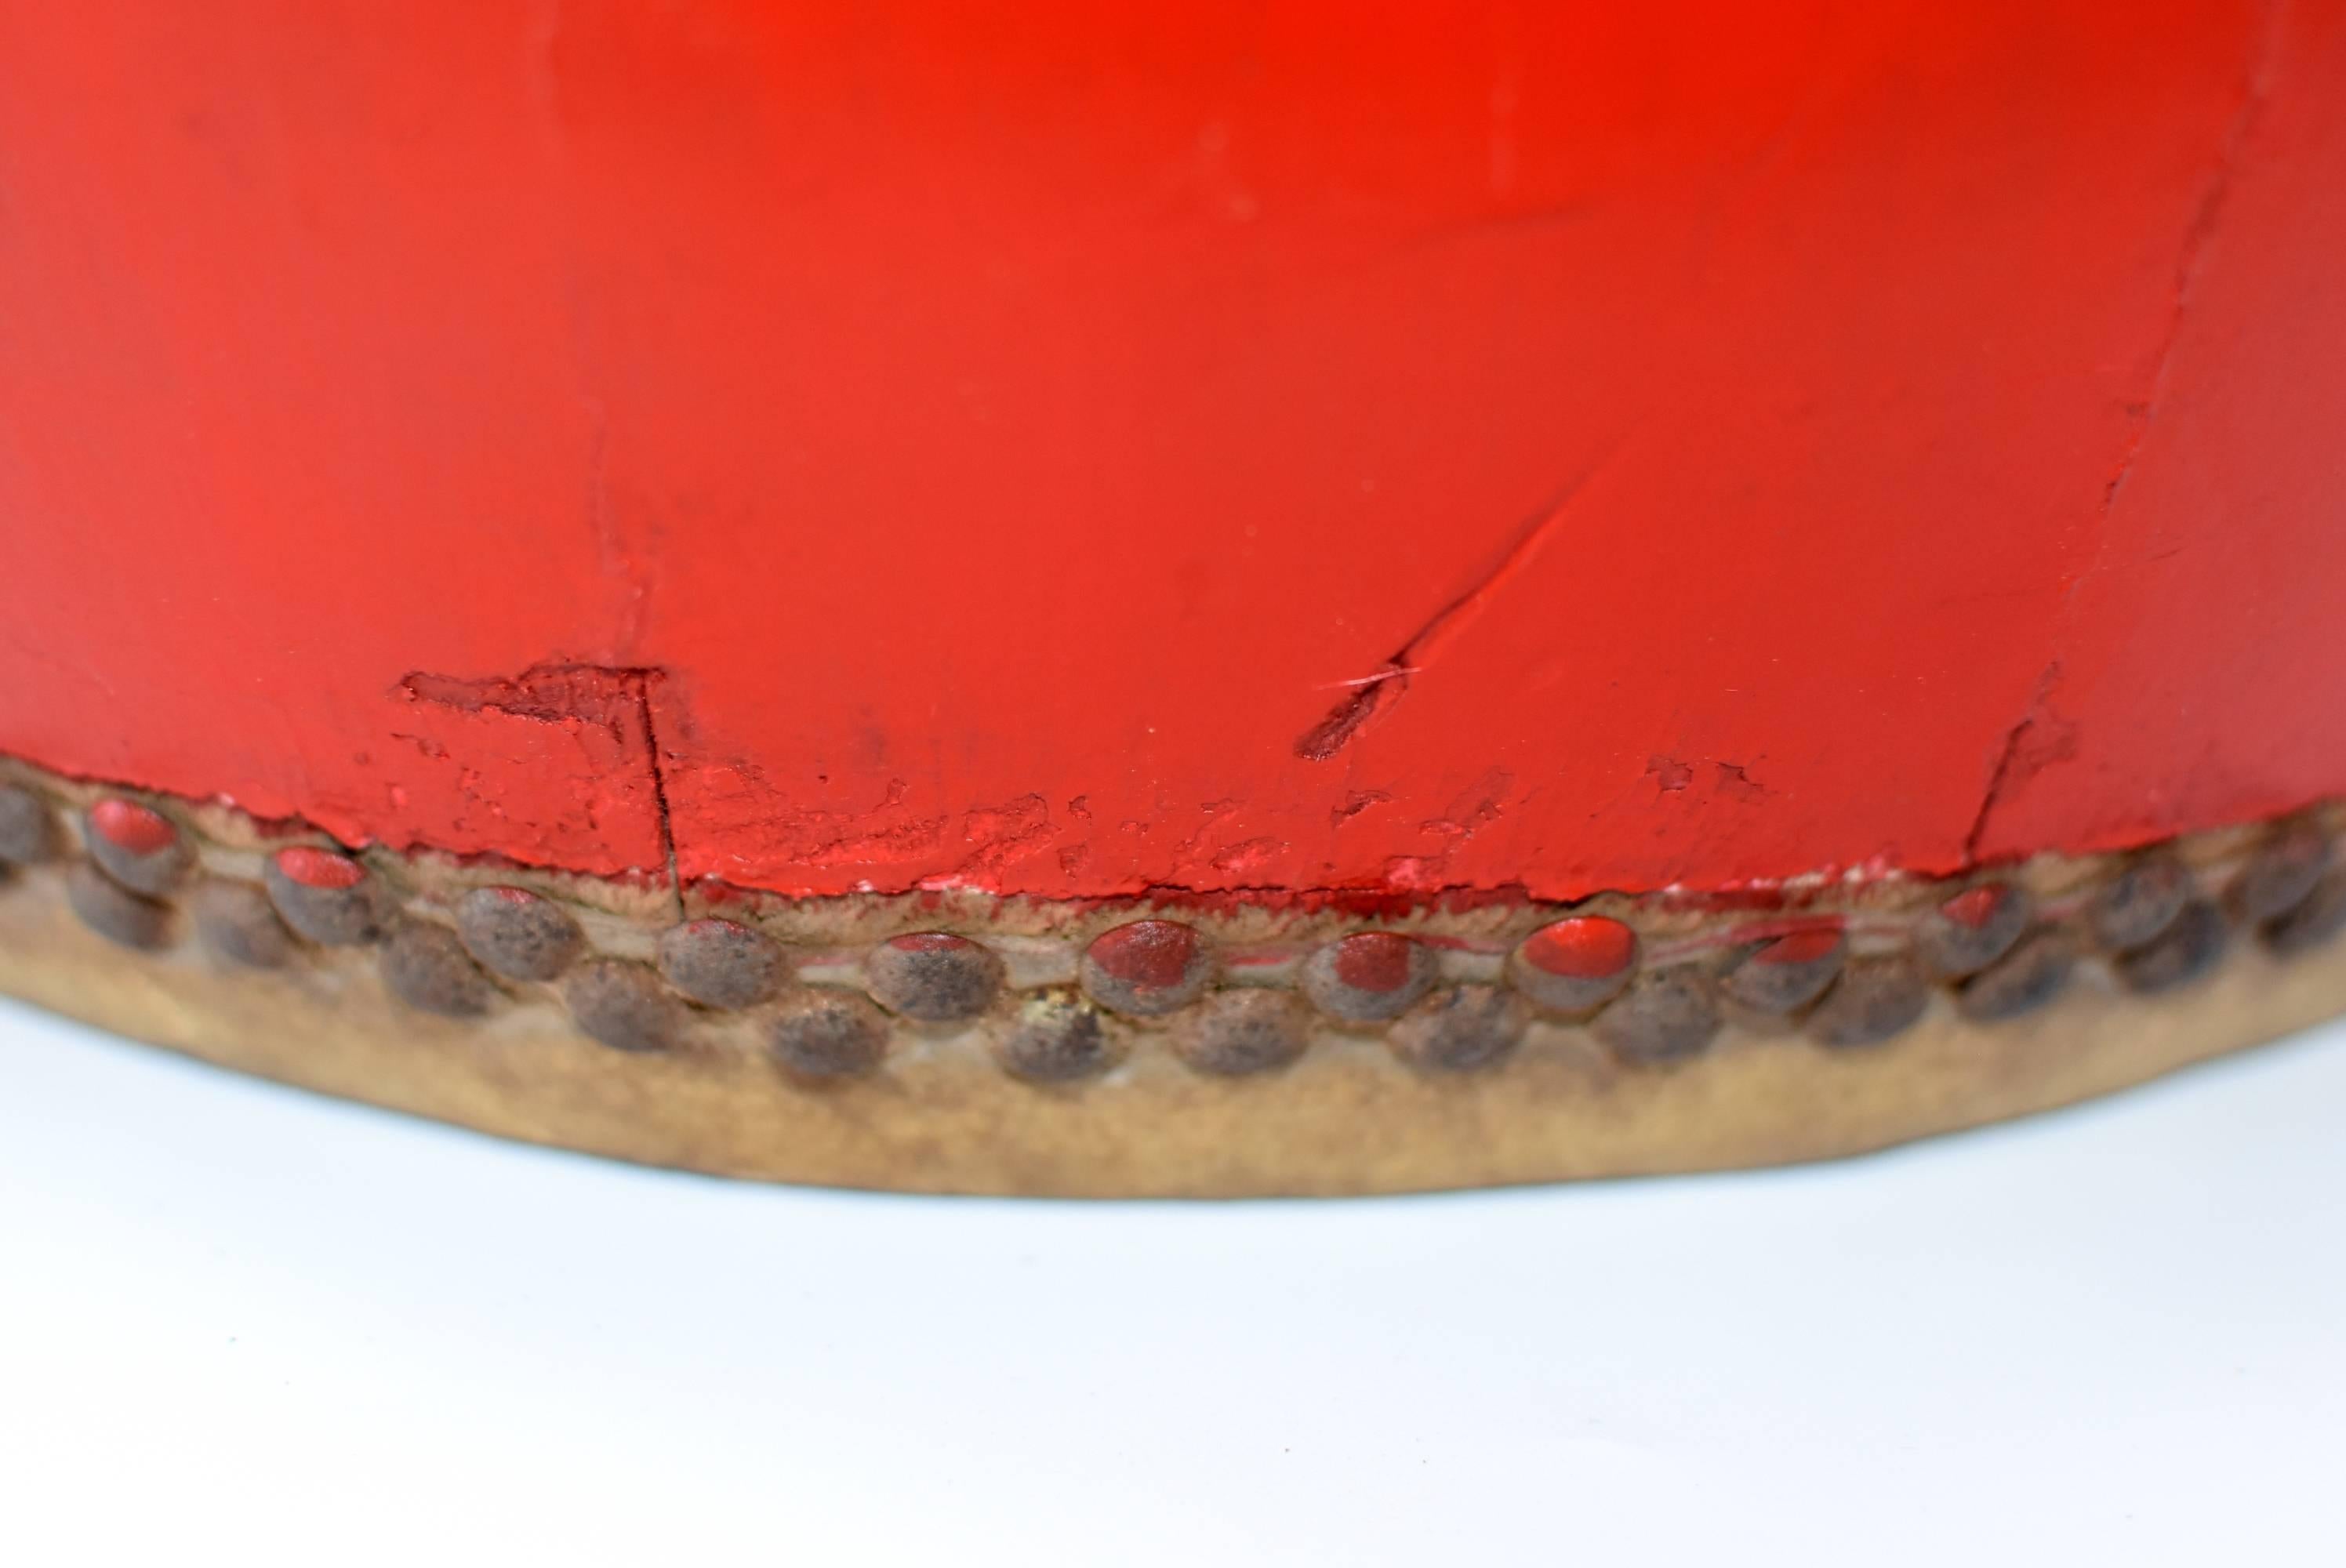 Vintage Red Lacquered Drum, Maker's Mark 4